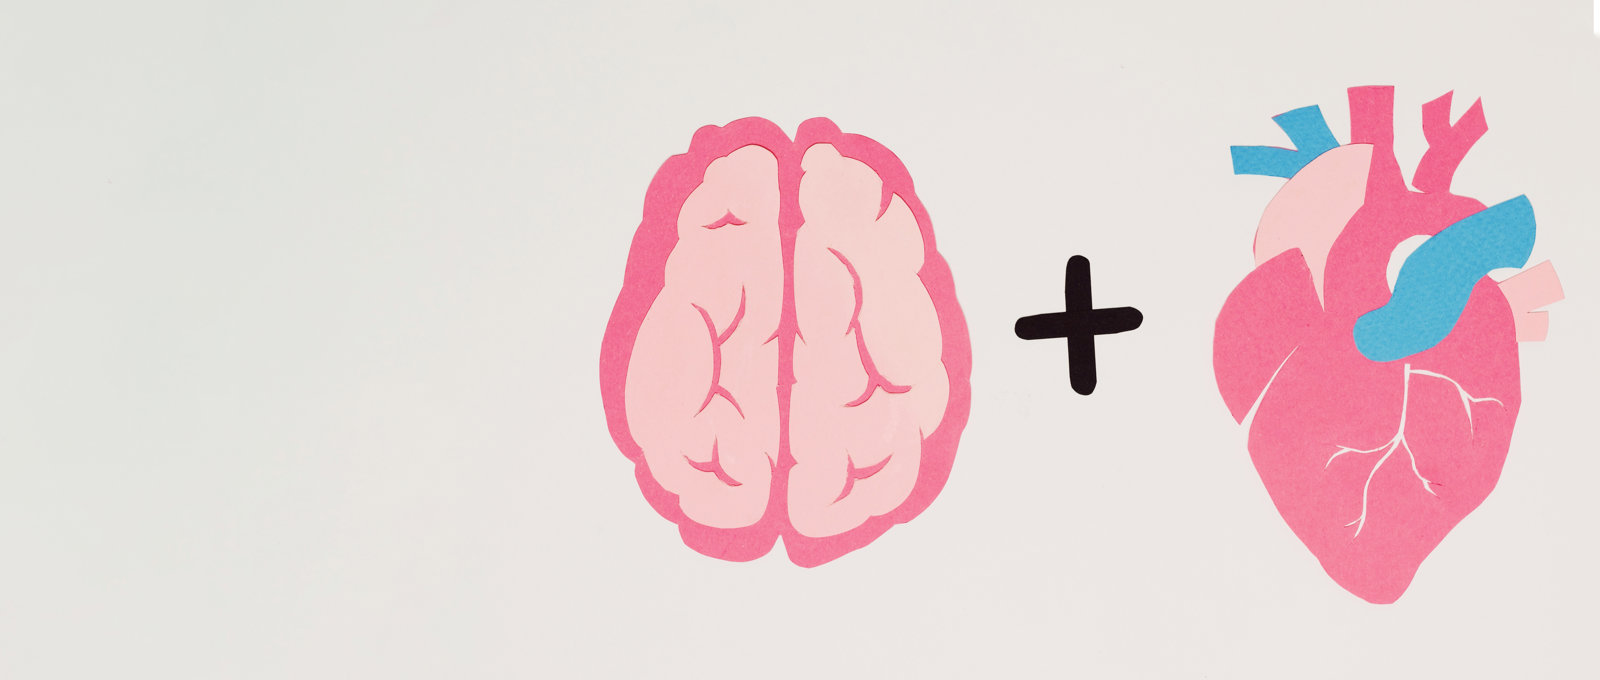 Illustration of a brain and a heart with a plus sign in between the two